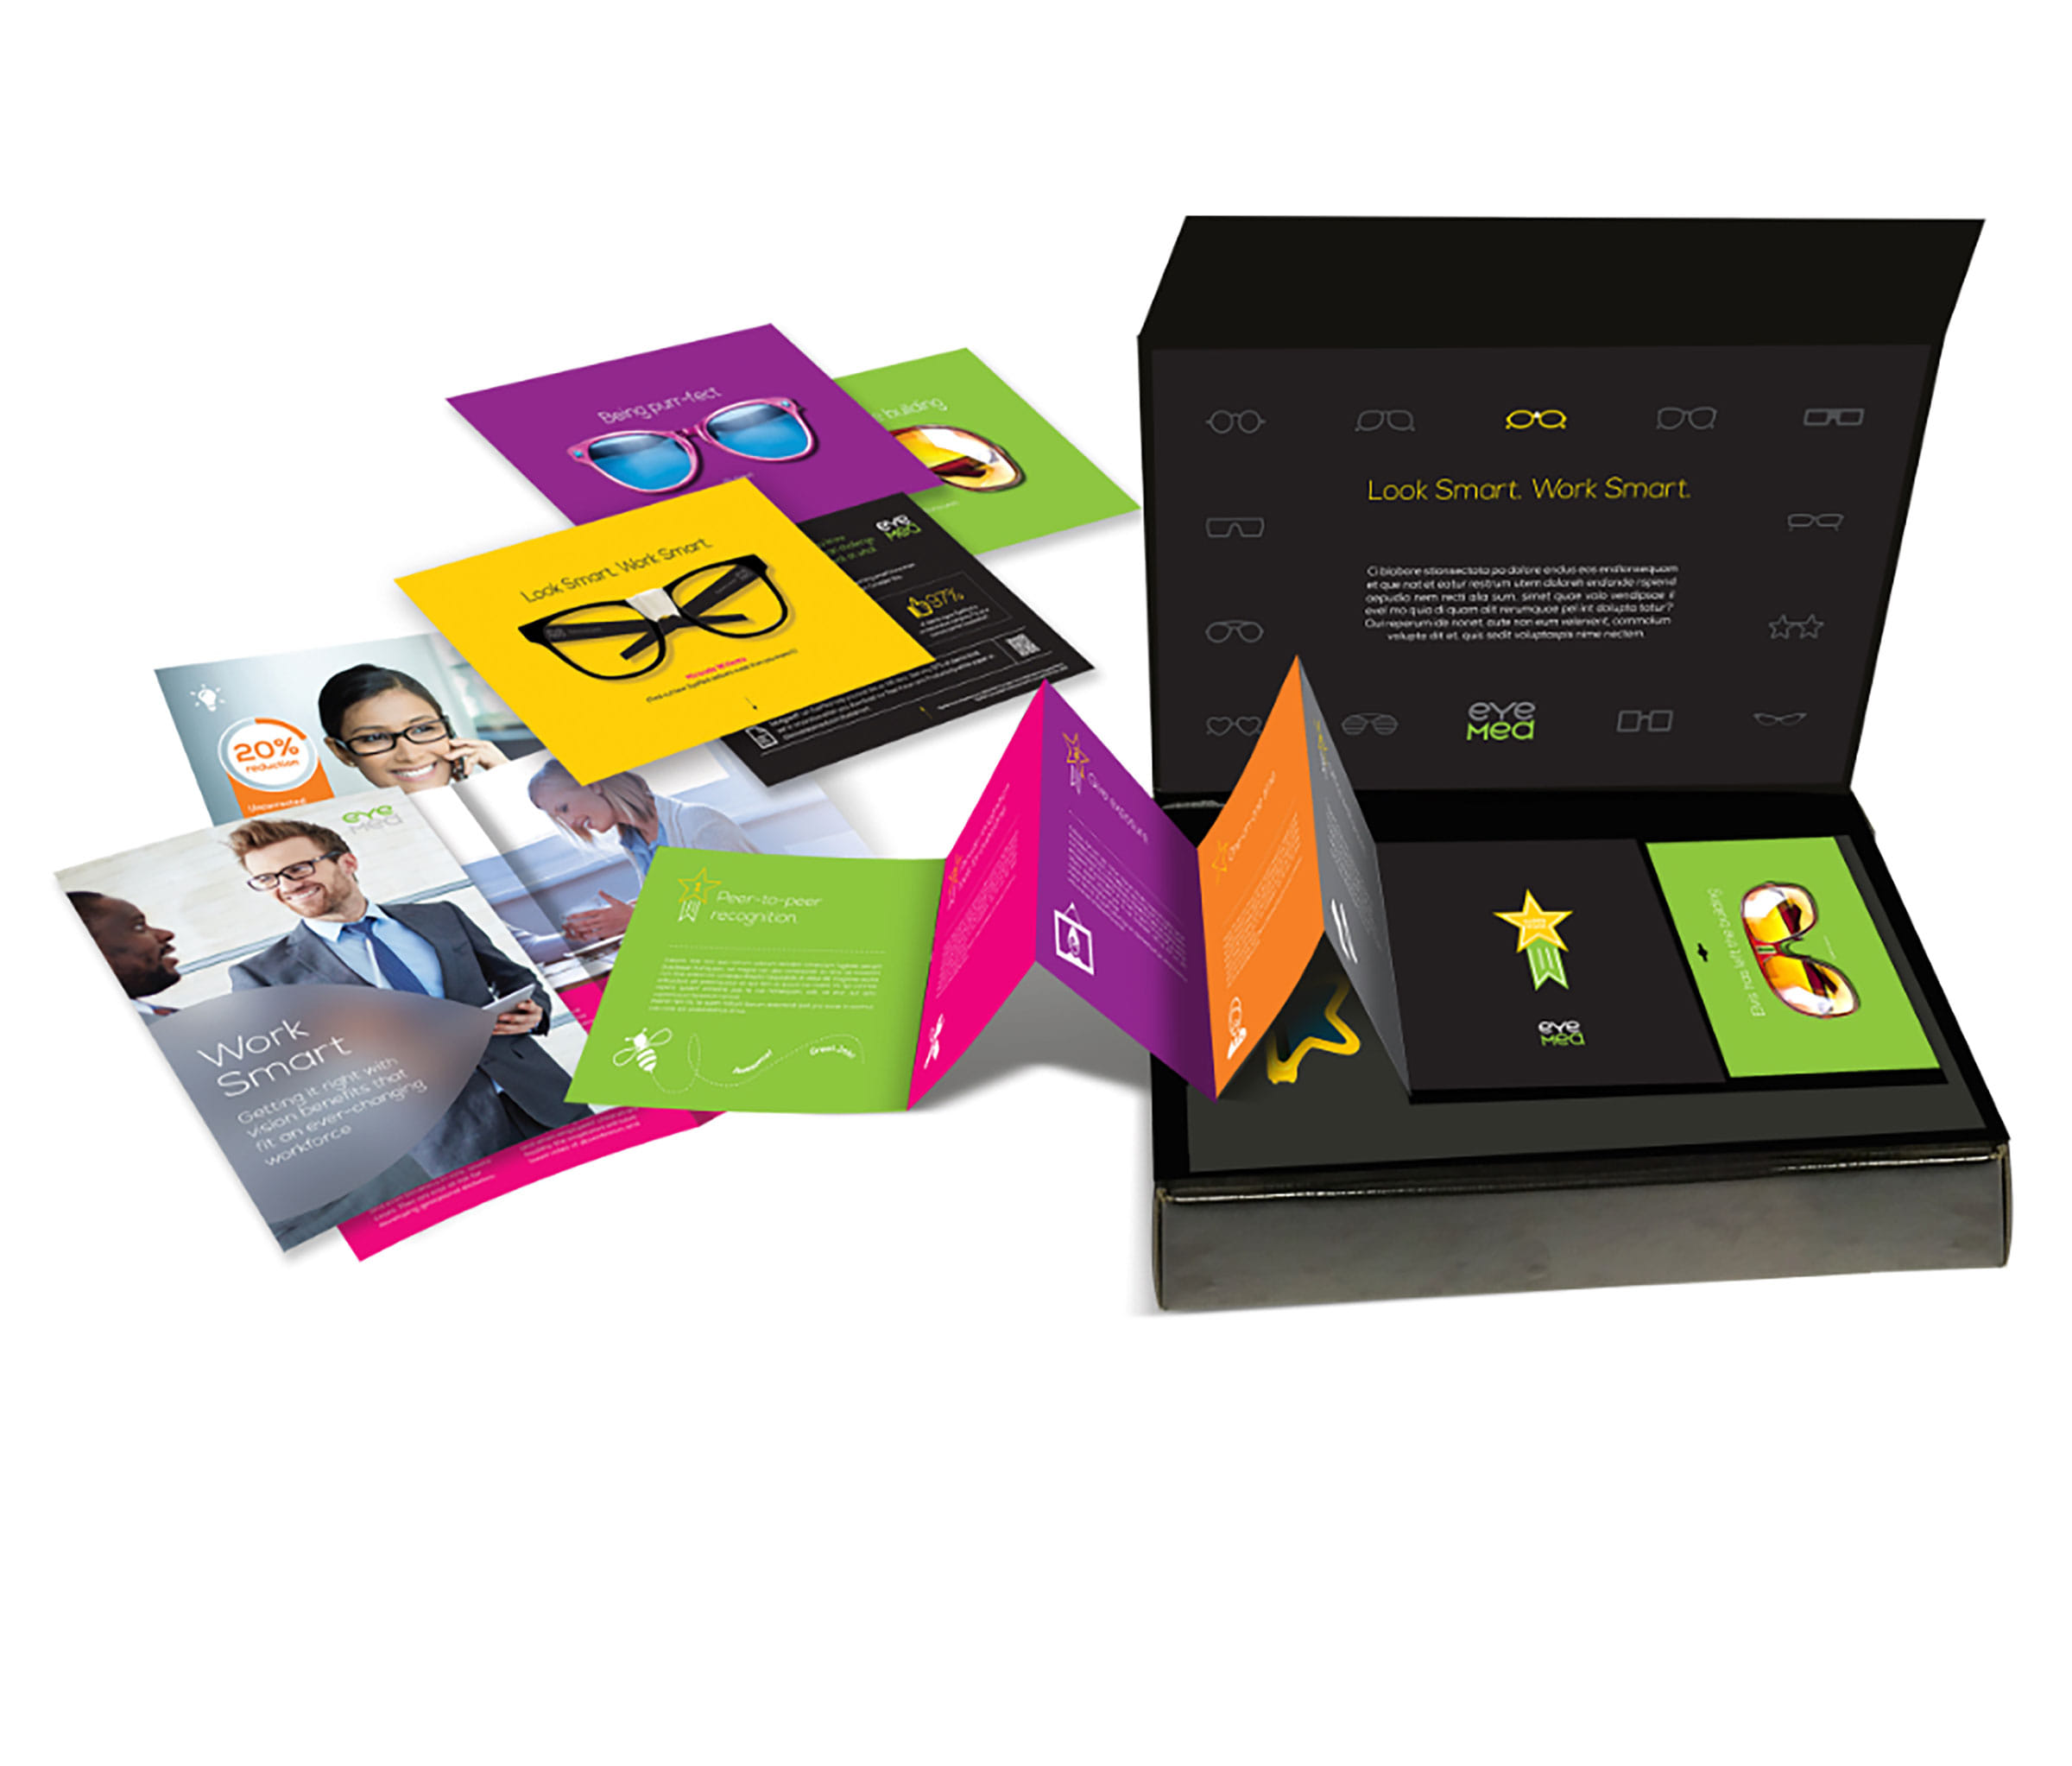 An integrated marketing brochure and sales kit